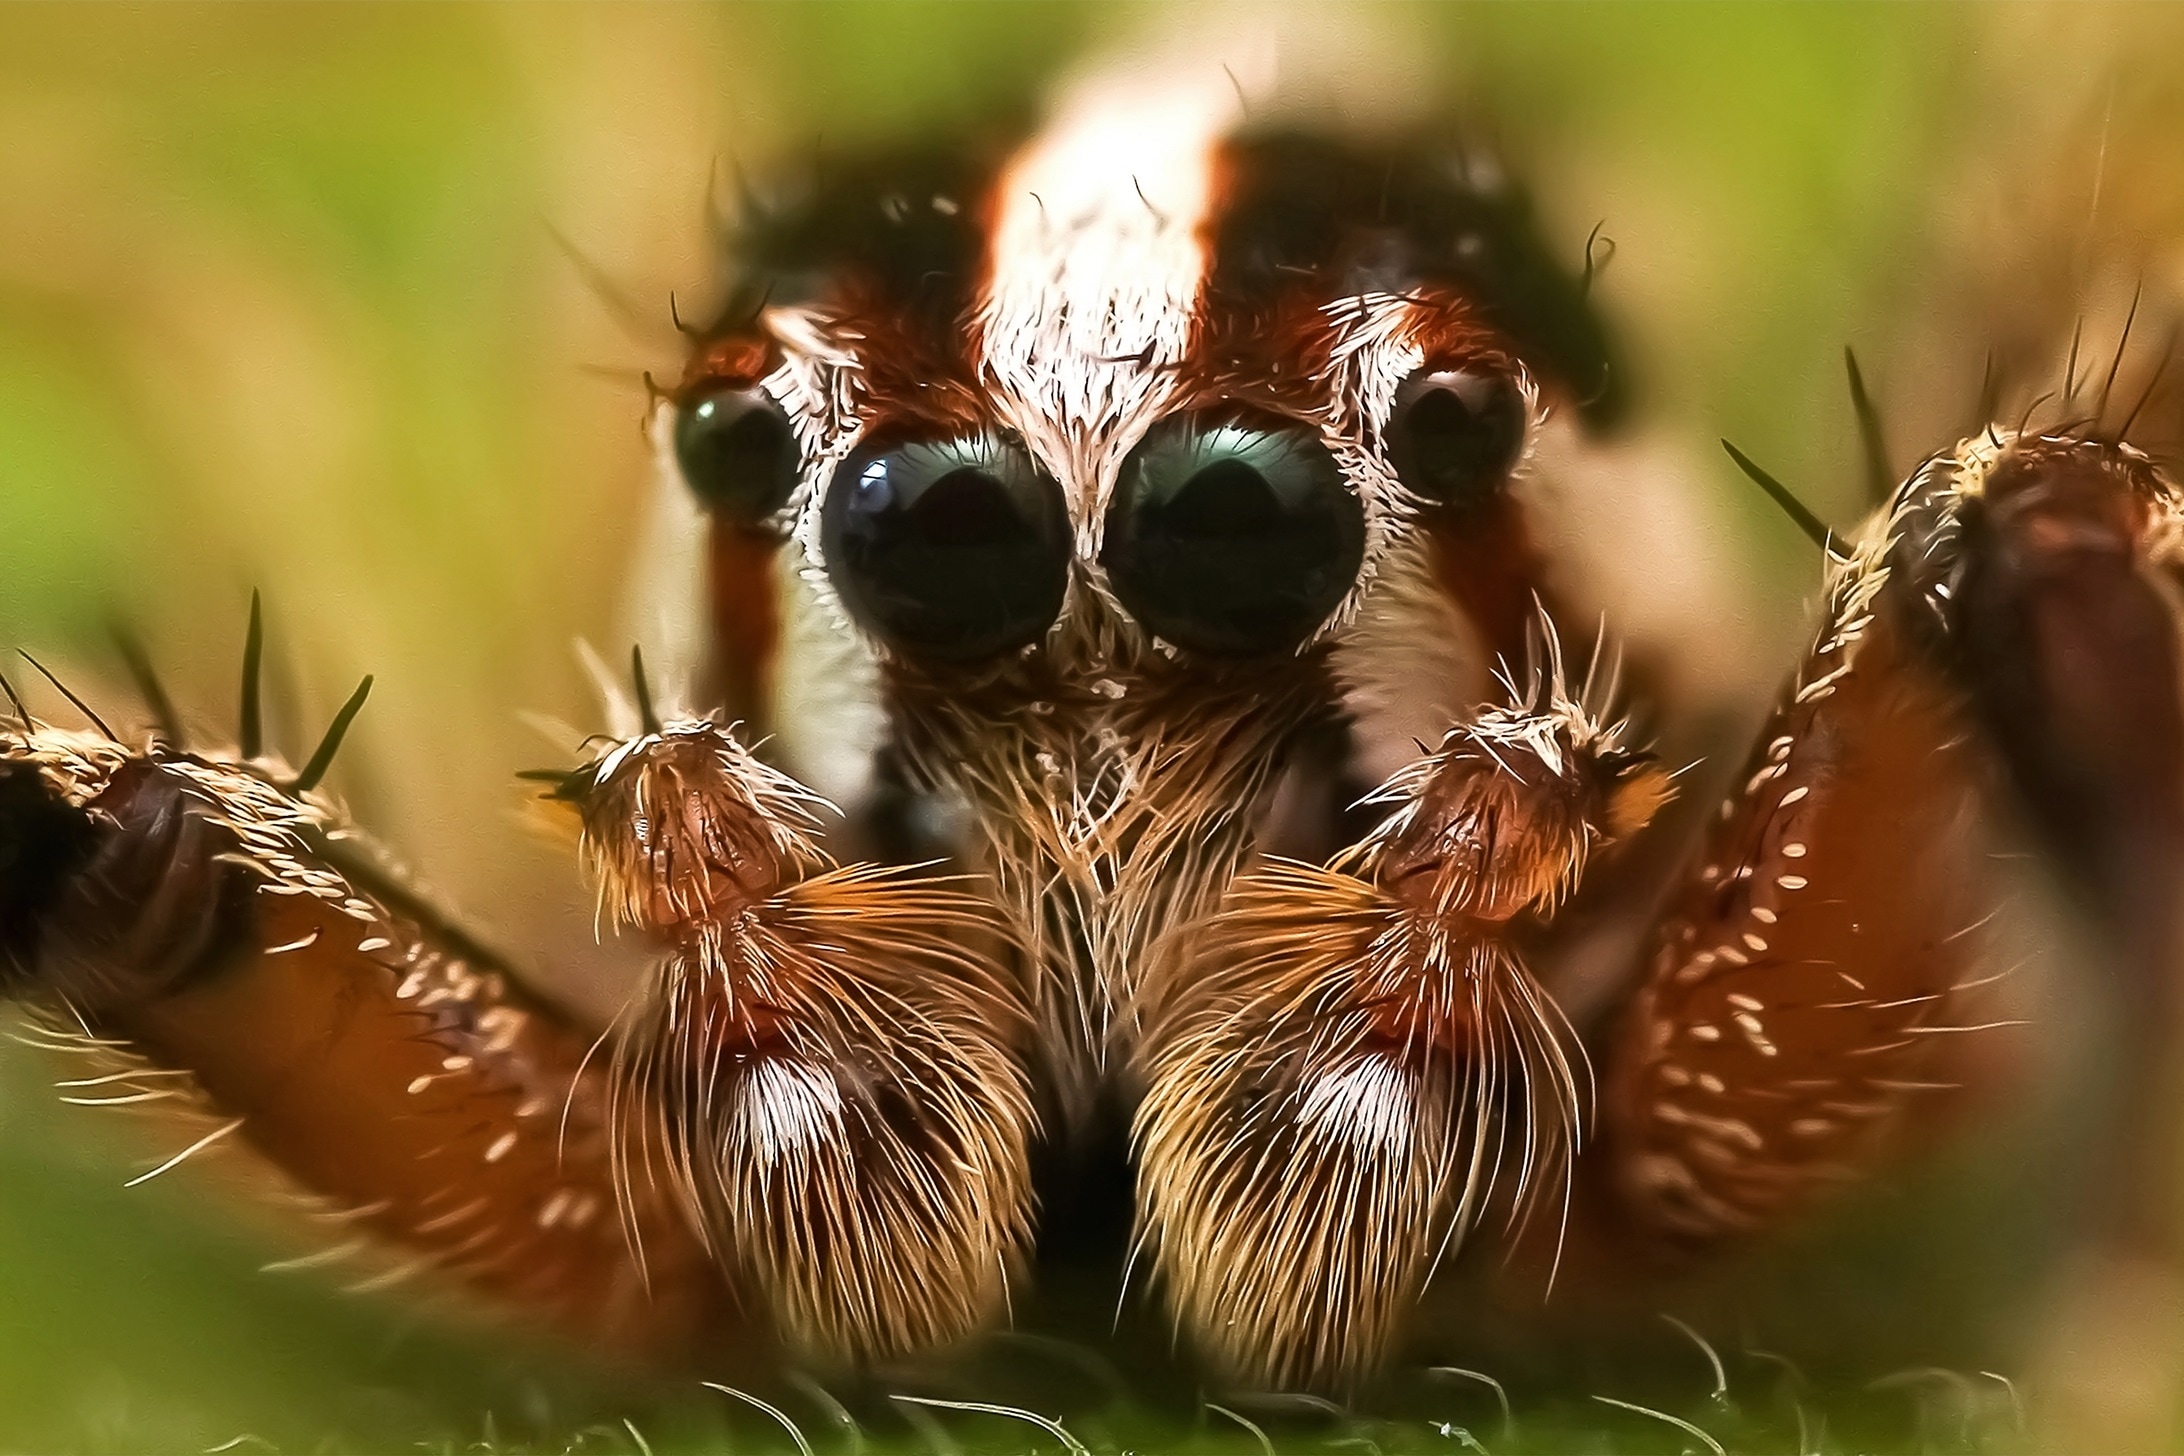 Jumping Spider, Insect, Macro, Spider, animal wildlife, one animal